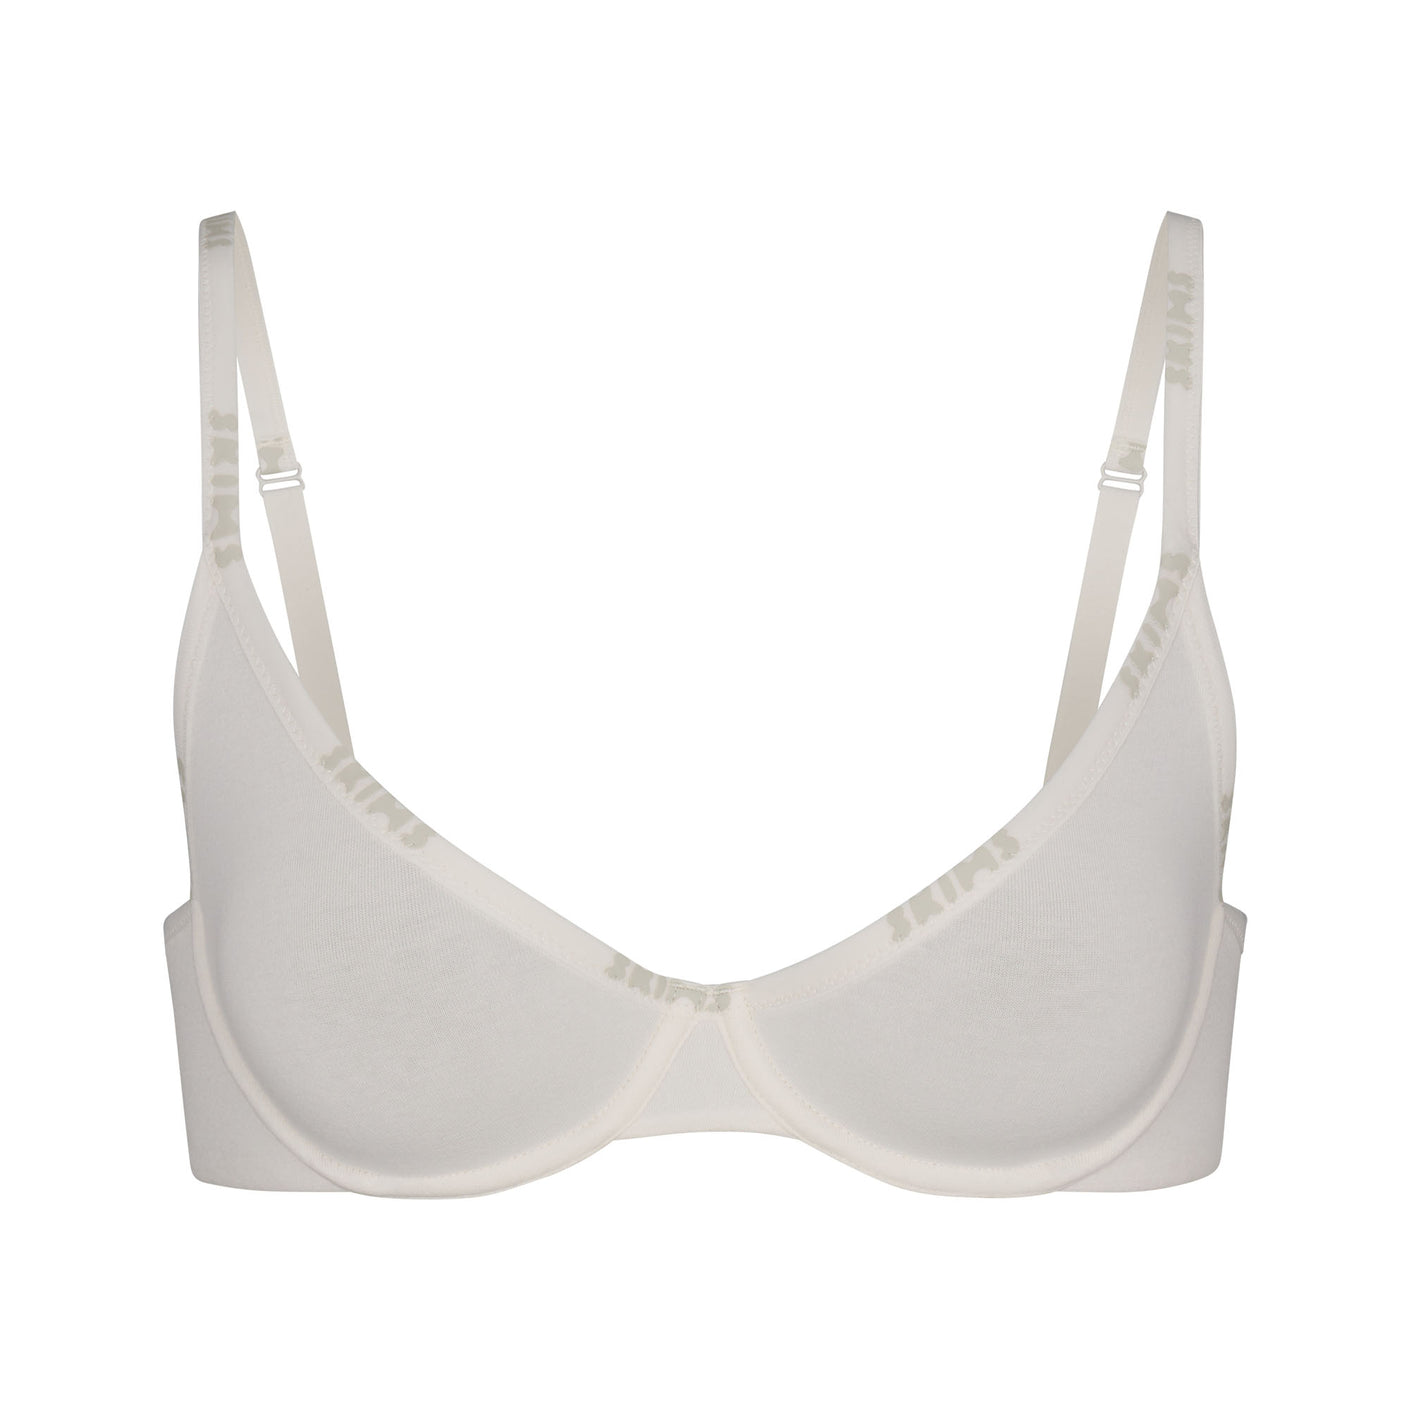 SKIMS Skim underlined Demi bra Tan Size undefined - $31 New With Tags -  From Maria